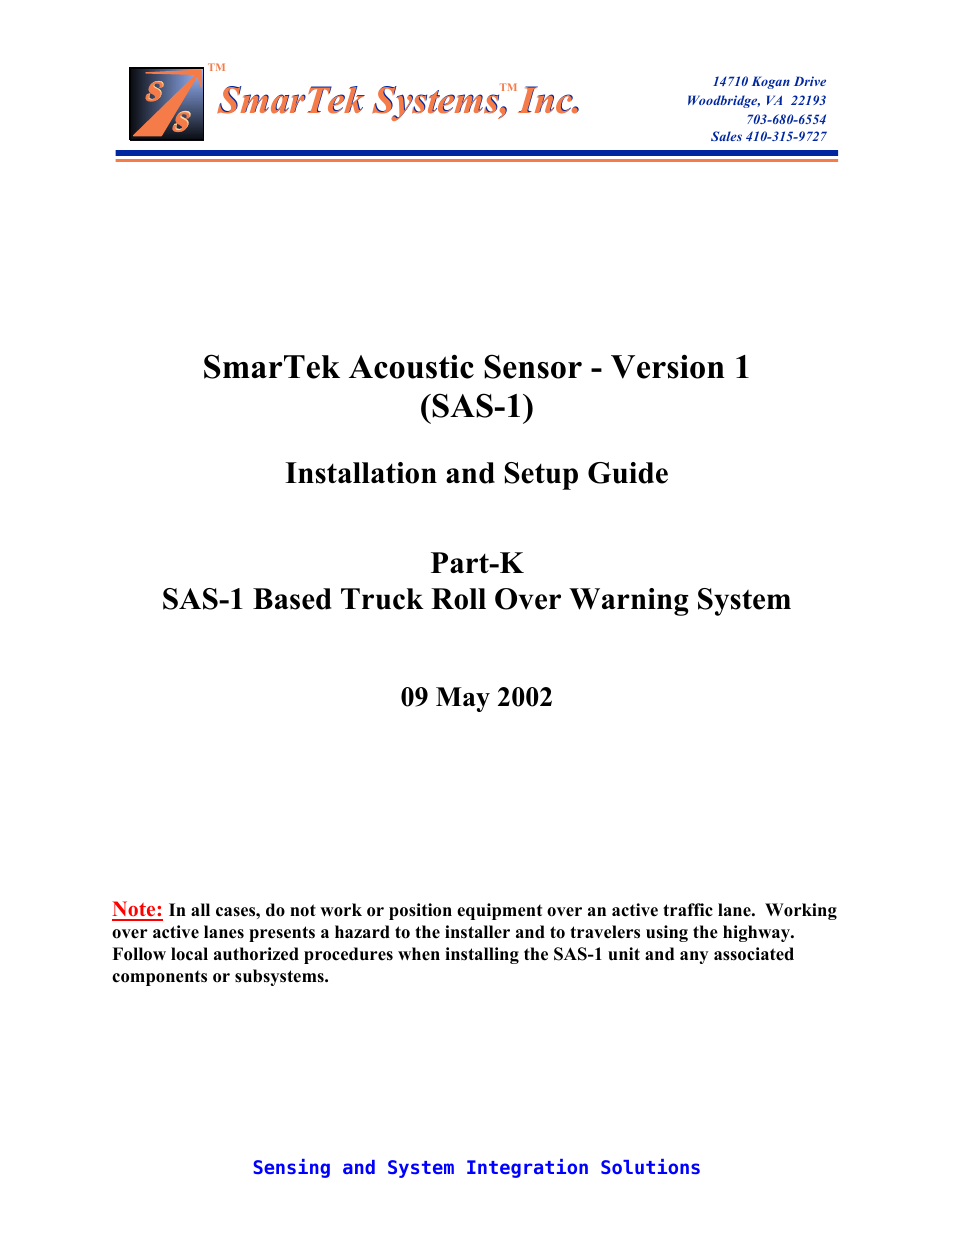 SAS-1 Based Truck Roll Over Warning System